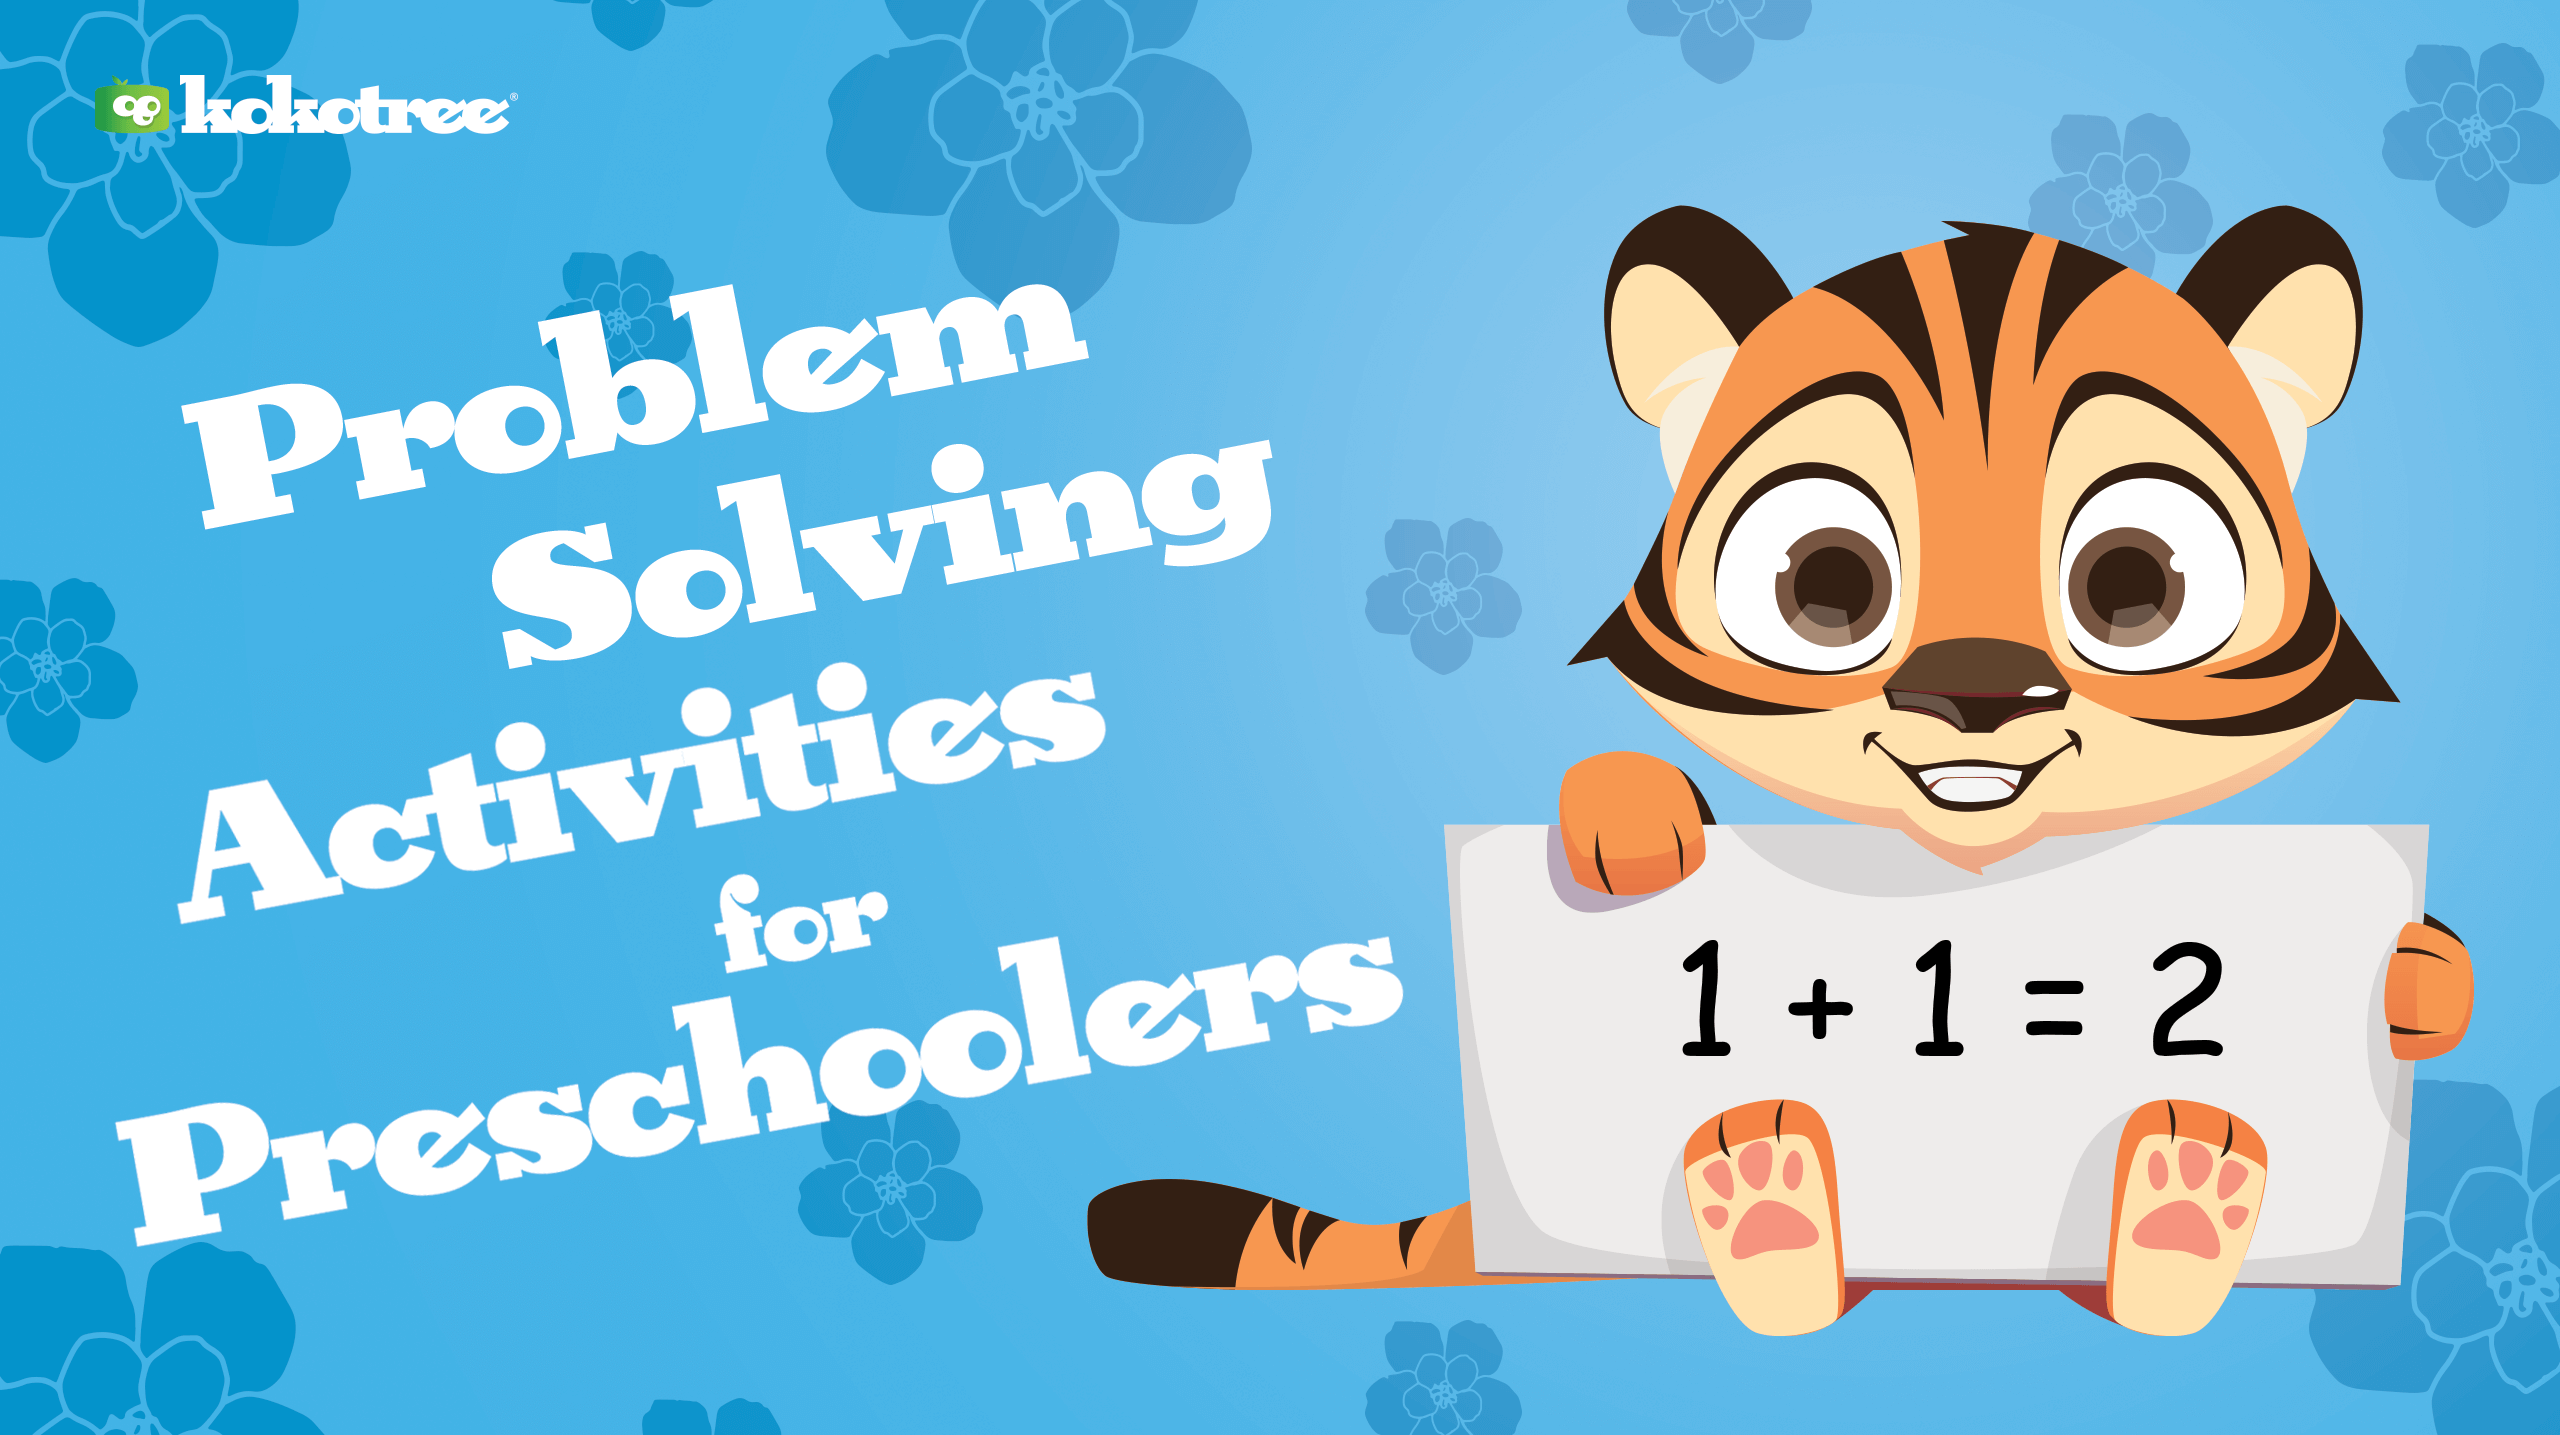 numeracy activities that will promote problem solving skills